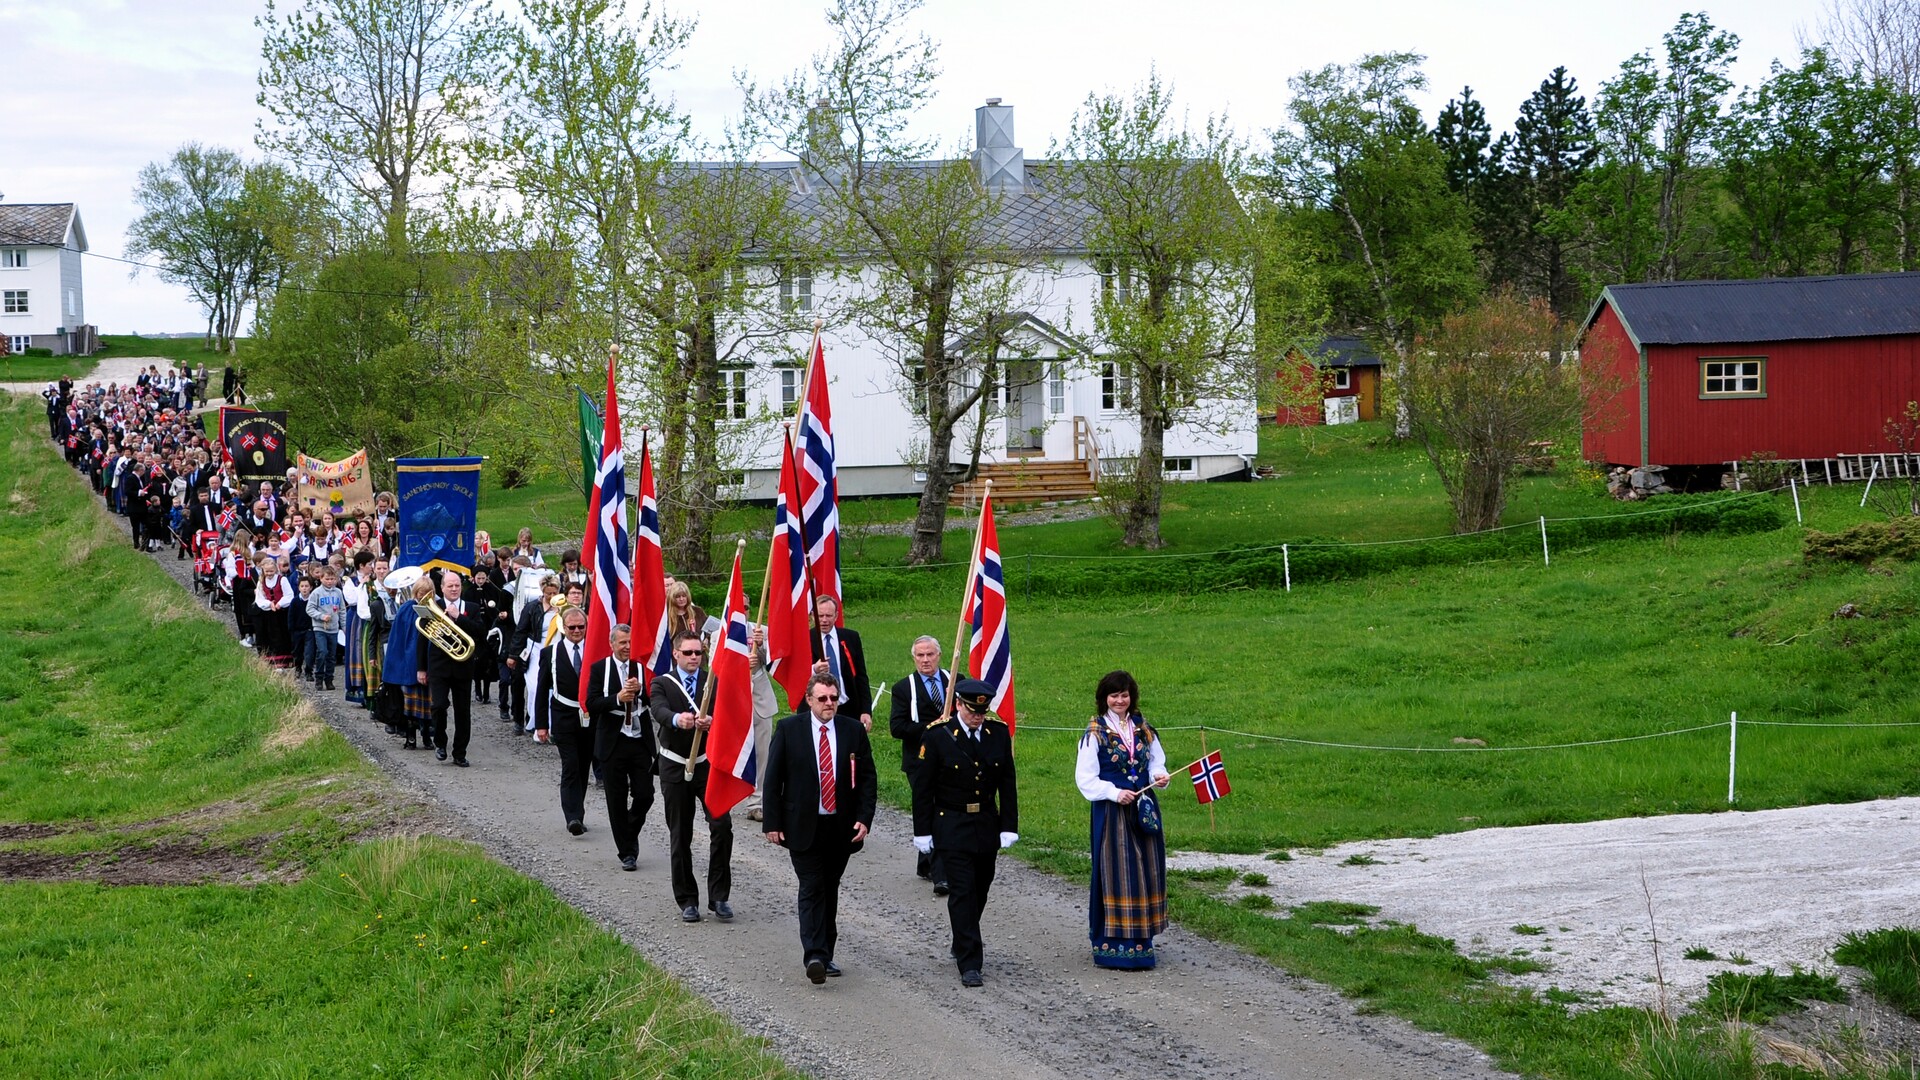 17th of May parade in Gildeskål, while trees and fields are getting green © Marit Elise Solbakken